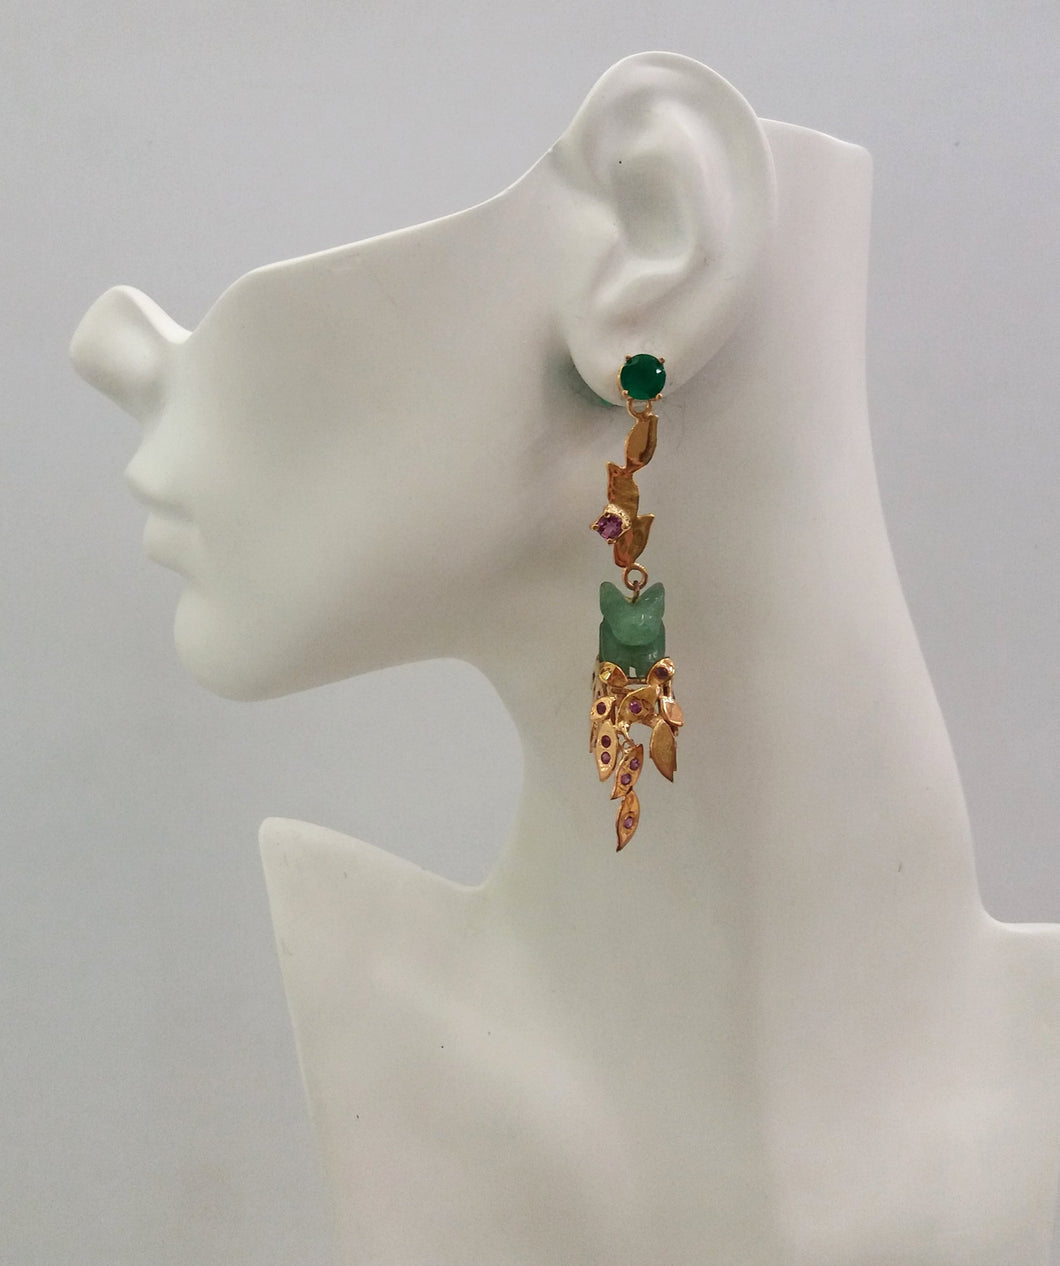 'Foliage' Twinset Earrings with Green Agate, Rhodolite Garnets & carved Jade Rabbit